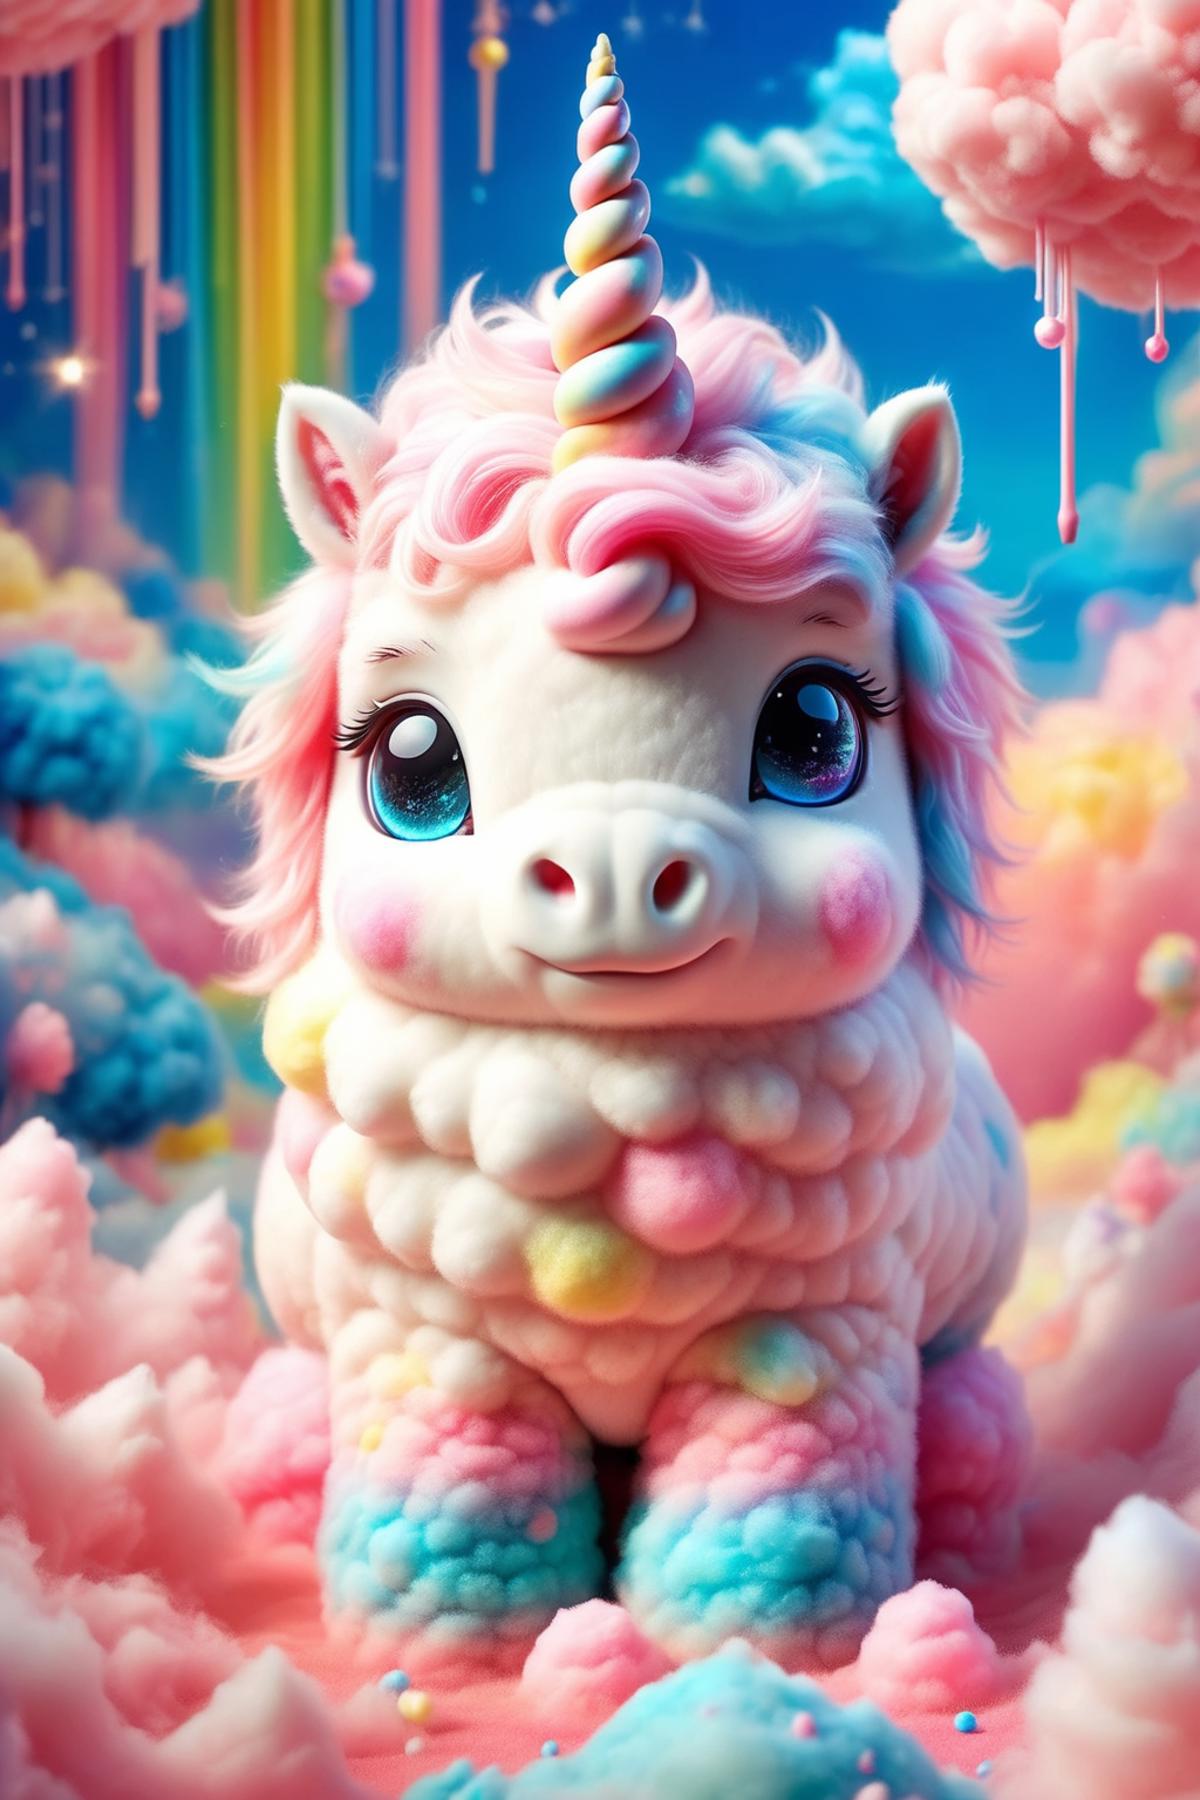 A cute and colorful stuffed unicorn doll with blue eyes and pink horns.